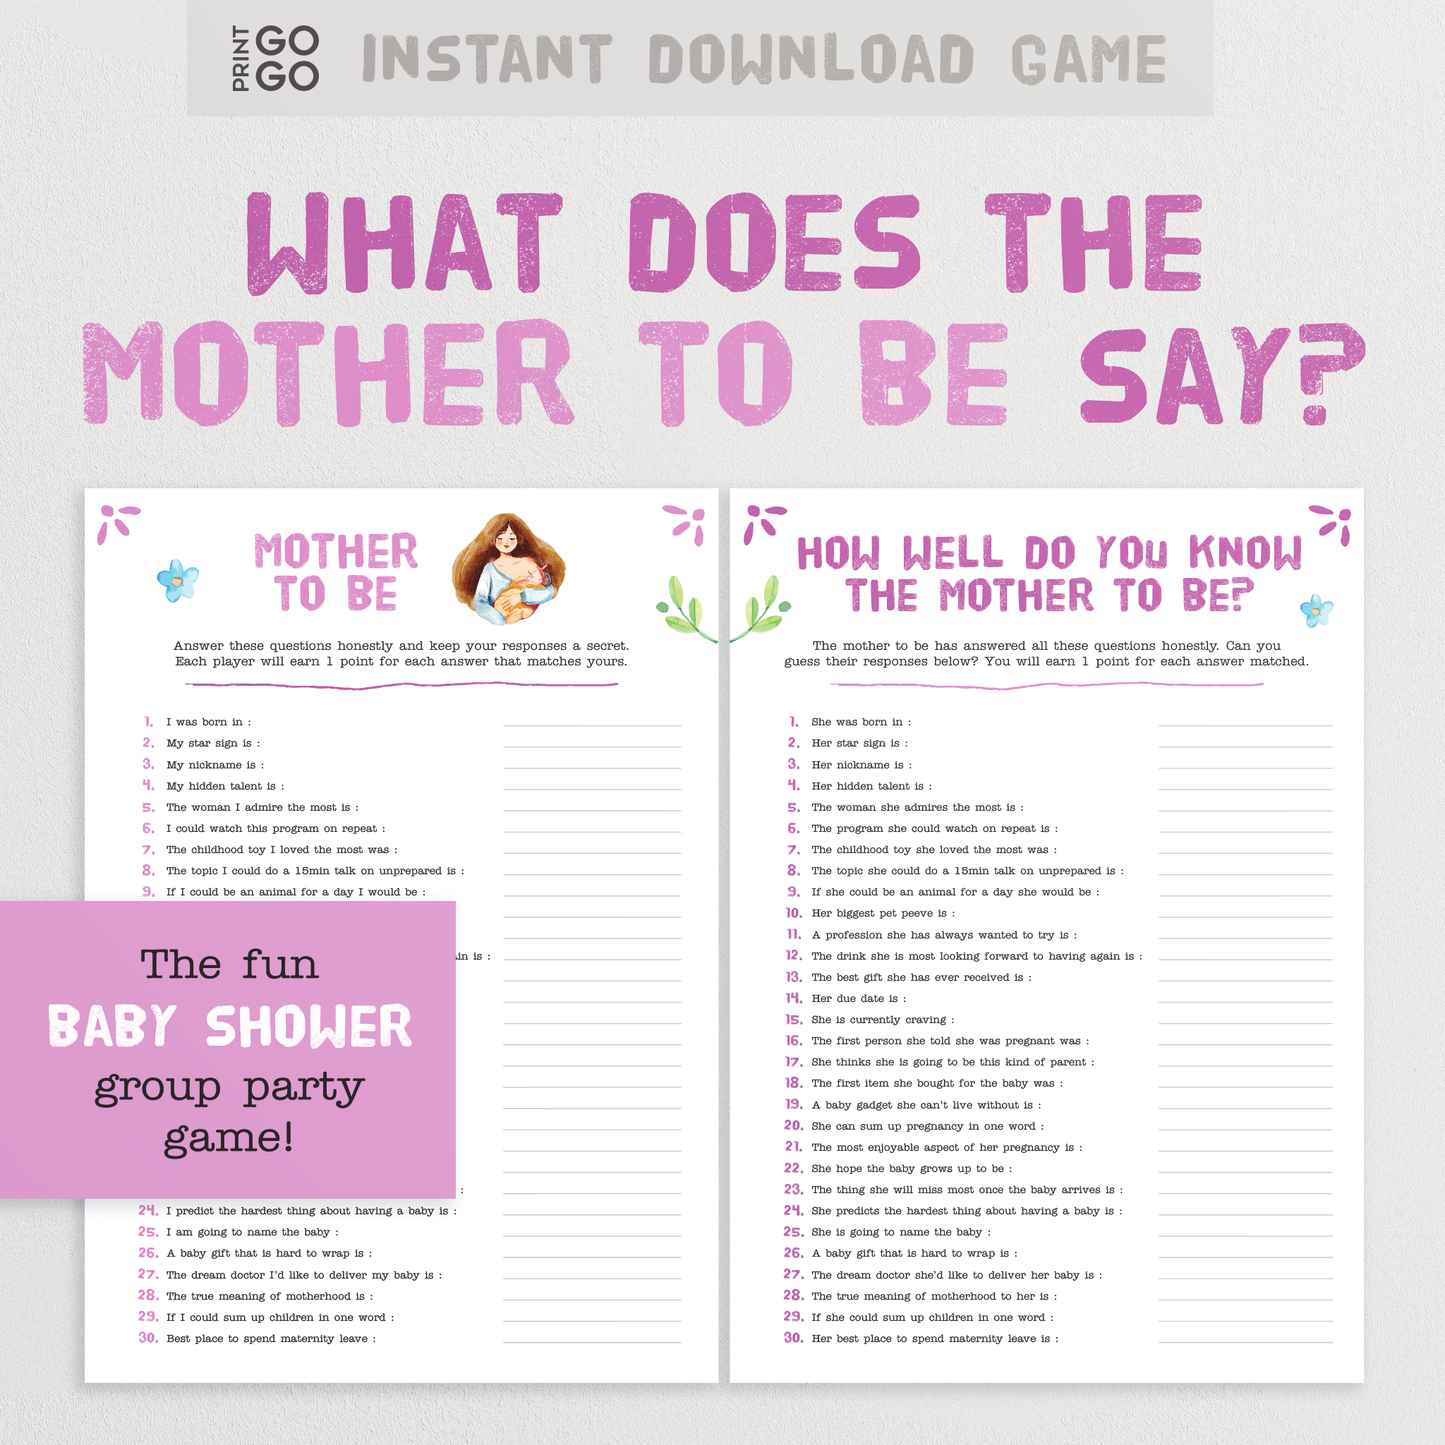 What Does the Mother To Be Say? - The Fun Baby Shower Group Party Game